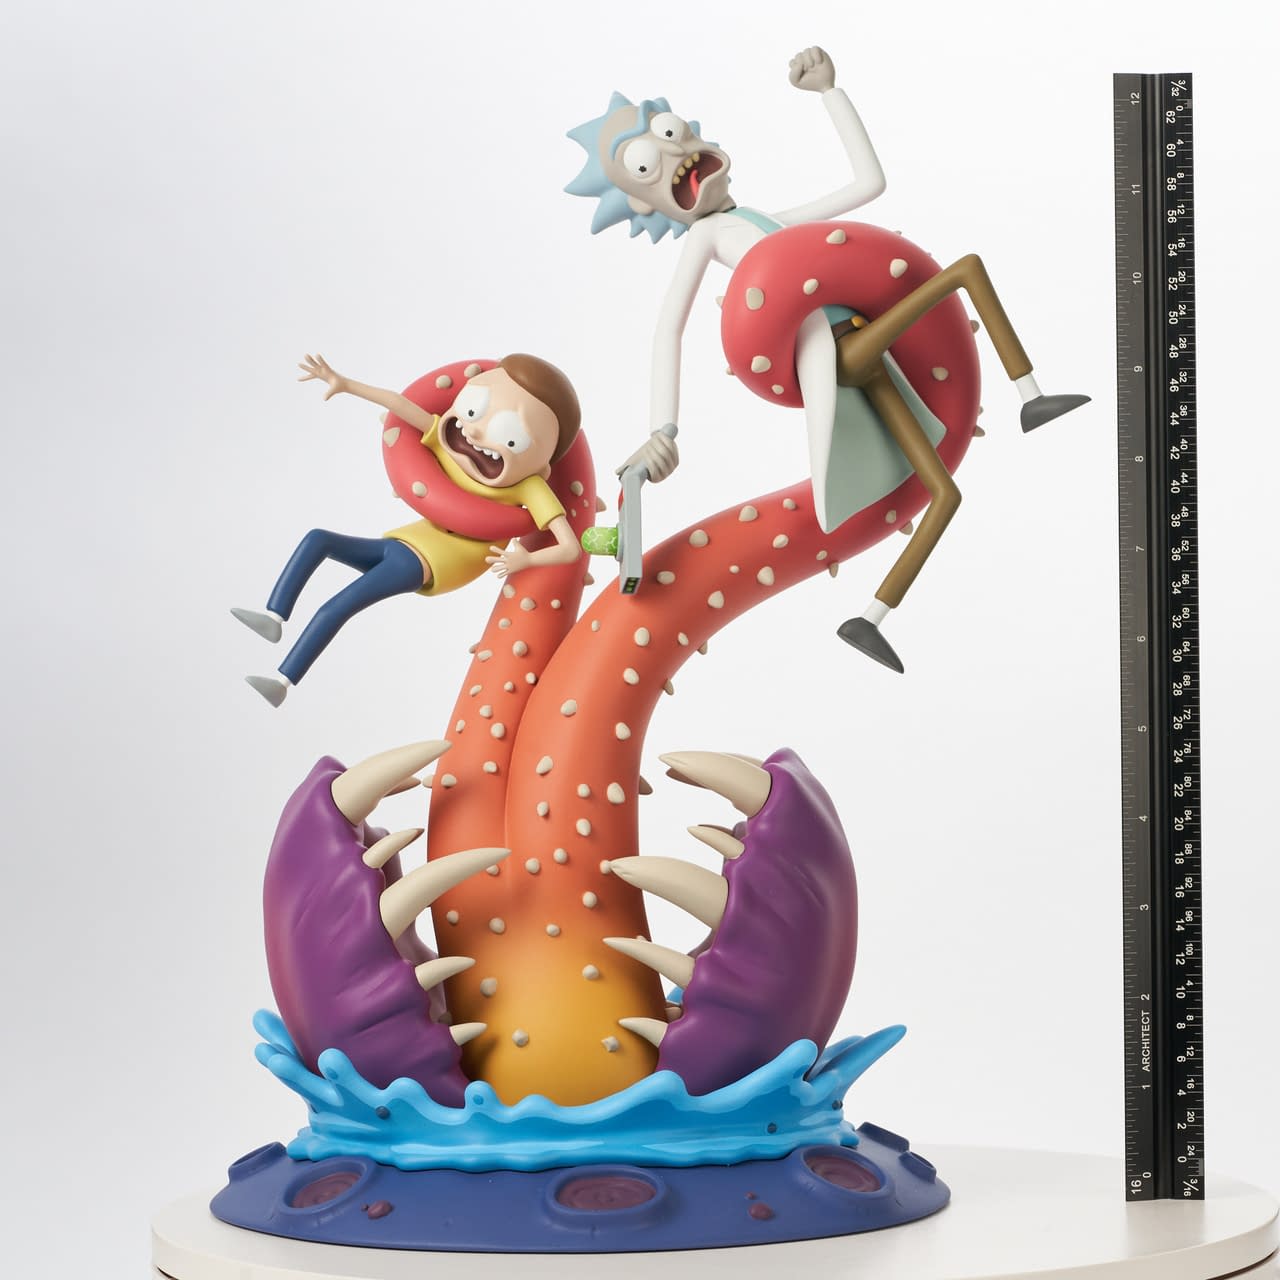 New Rick and Morty Statue Coming Soon to Diamond's Gallery Line 